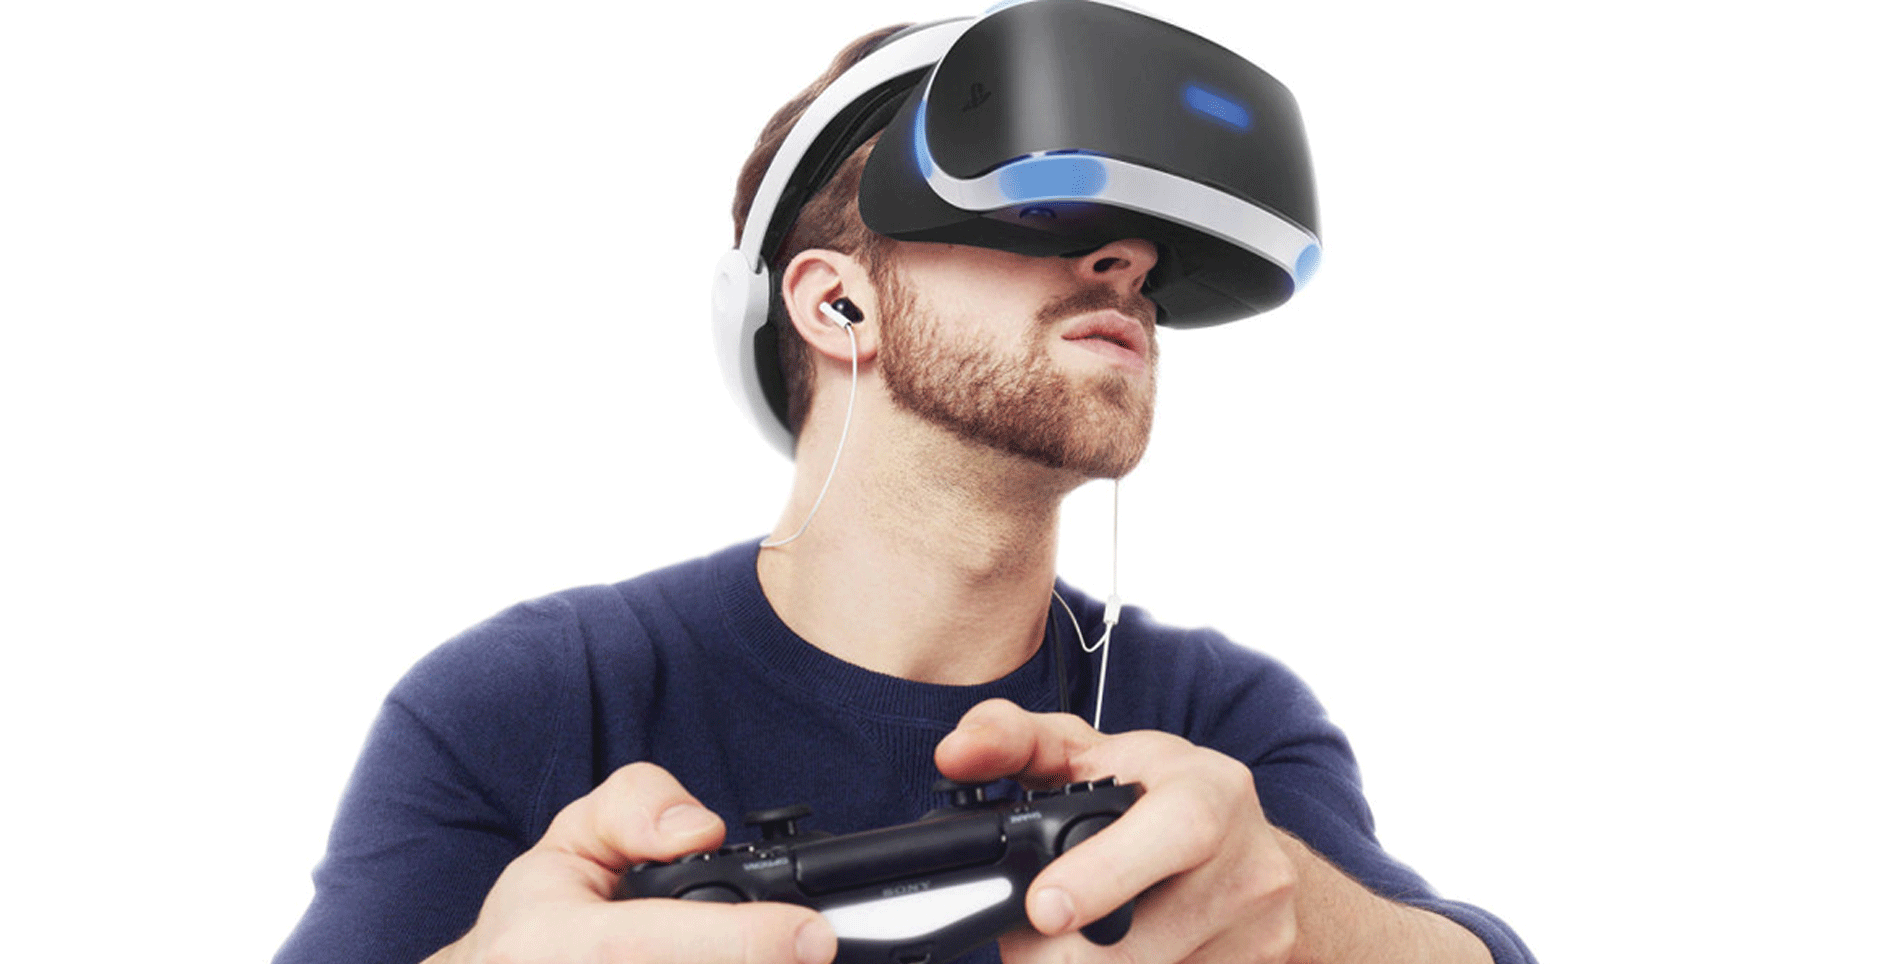 PlayStation VR - Review